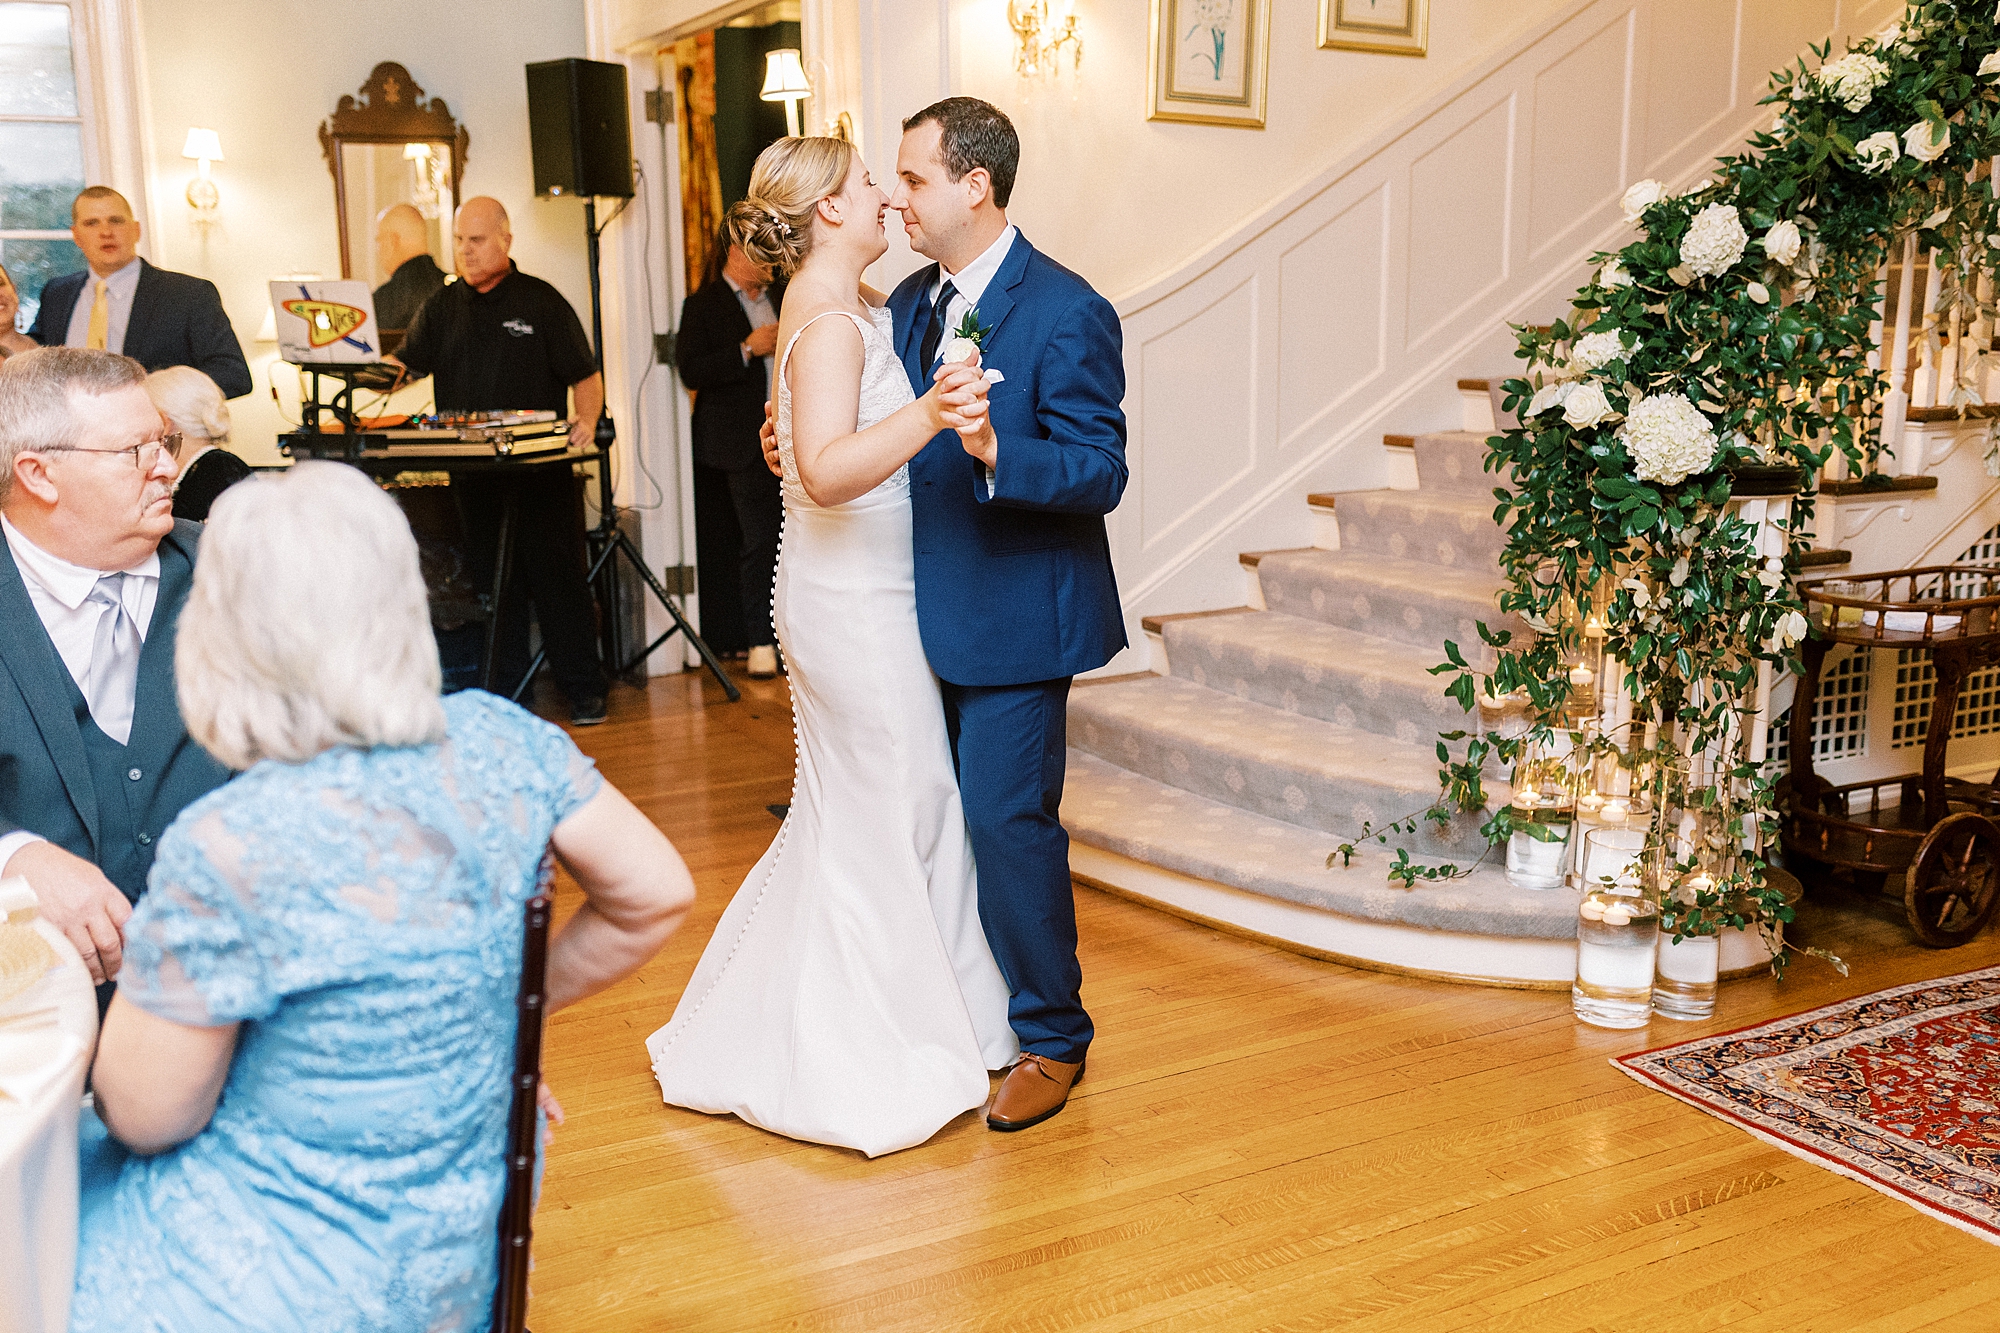 newlyweds dance during NC wedding reception at the Morehead Inn